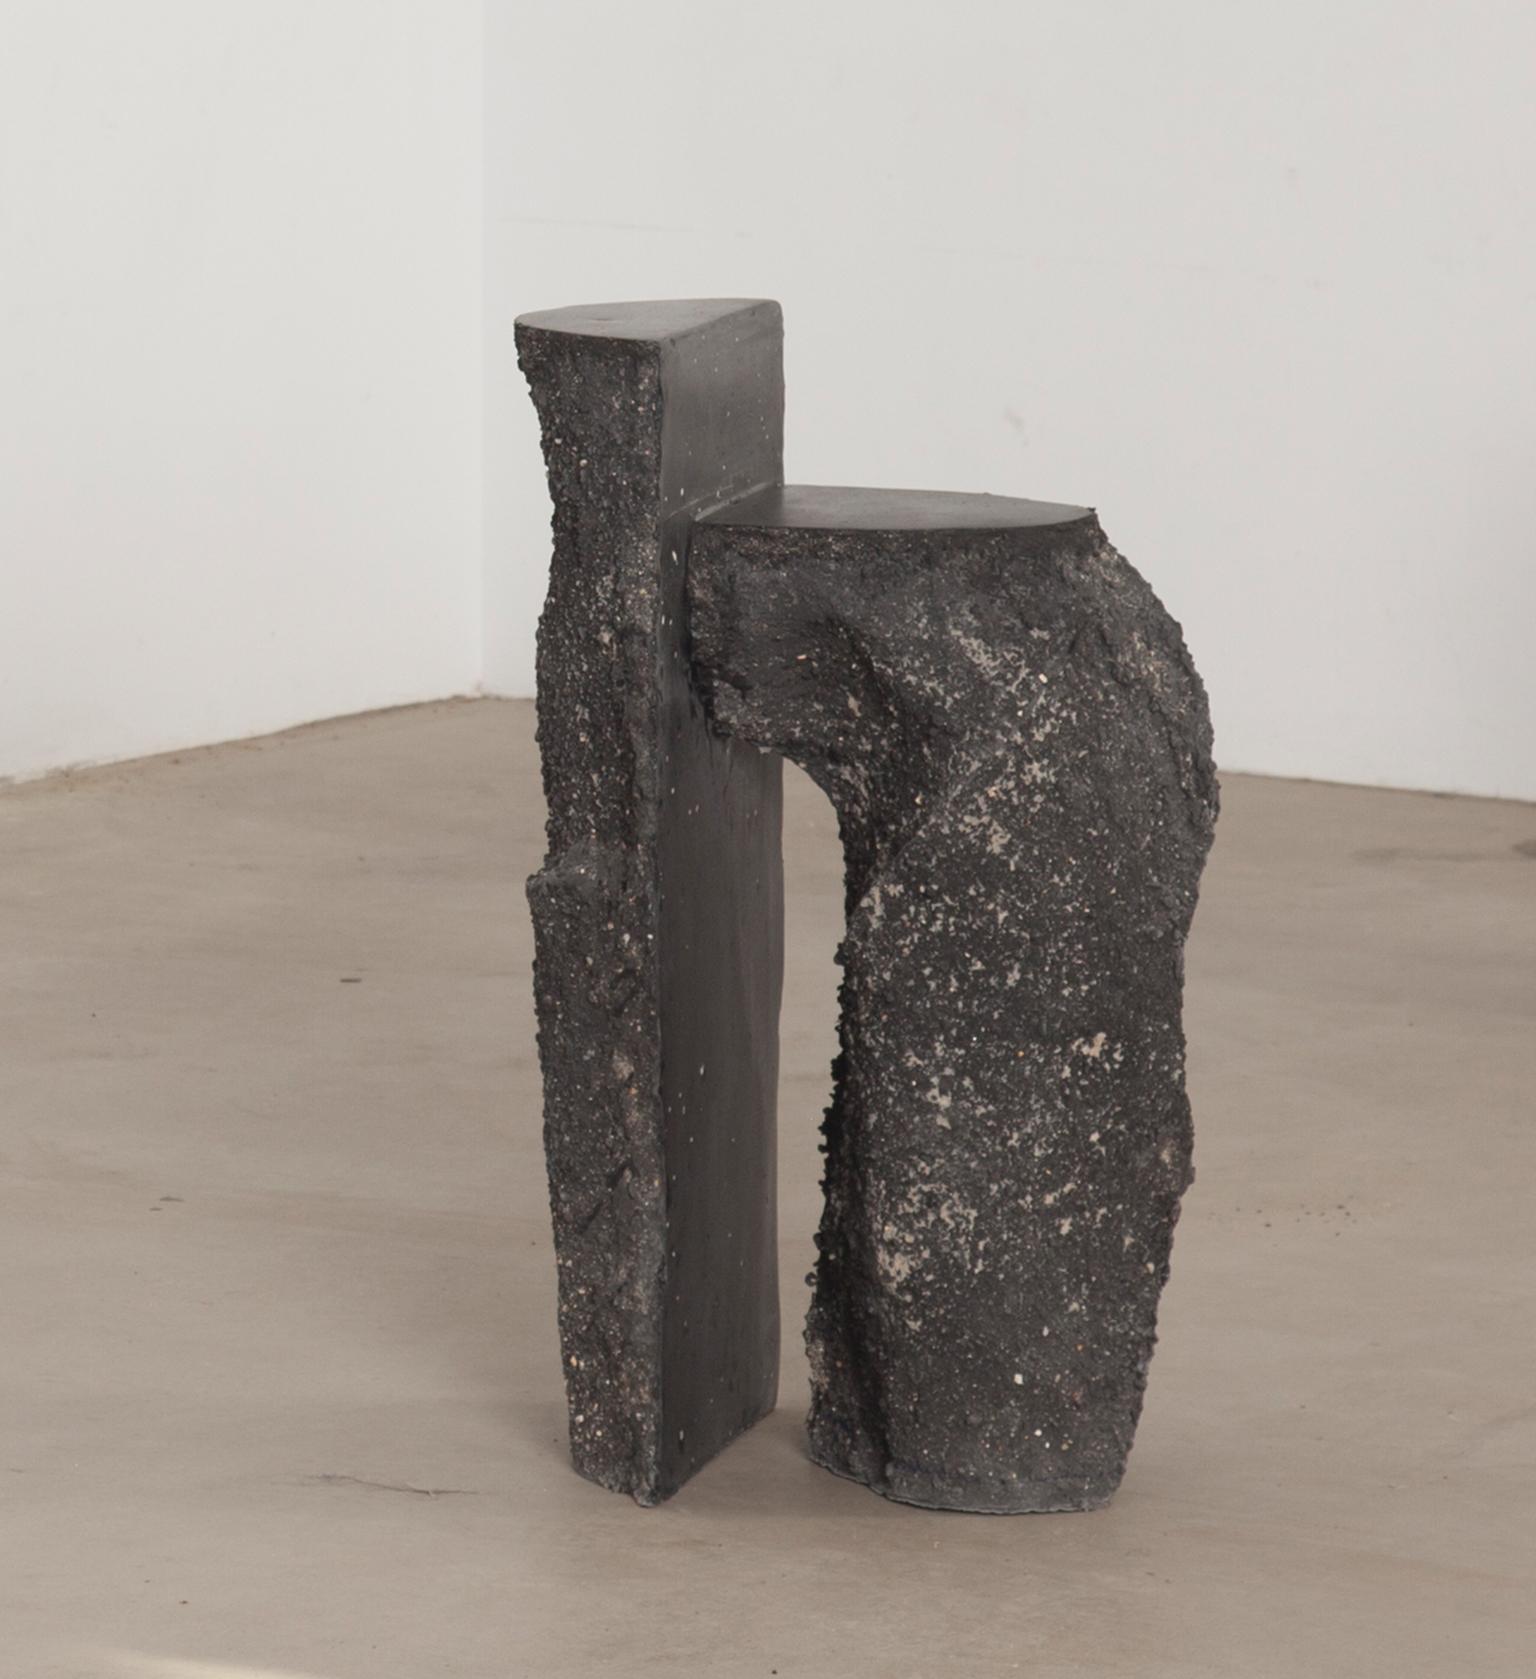 La Cube
R3, side table 2018
Water resin, jesmonite with black pigment, sand leftovers and silicone
Measures: H 63 L 27 W 39 cm
Unique piece
Spain.

The idea of ??this project is to bring the concept of the domestication of nature to extreme